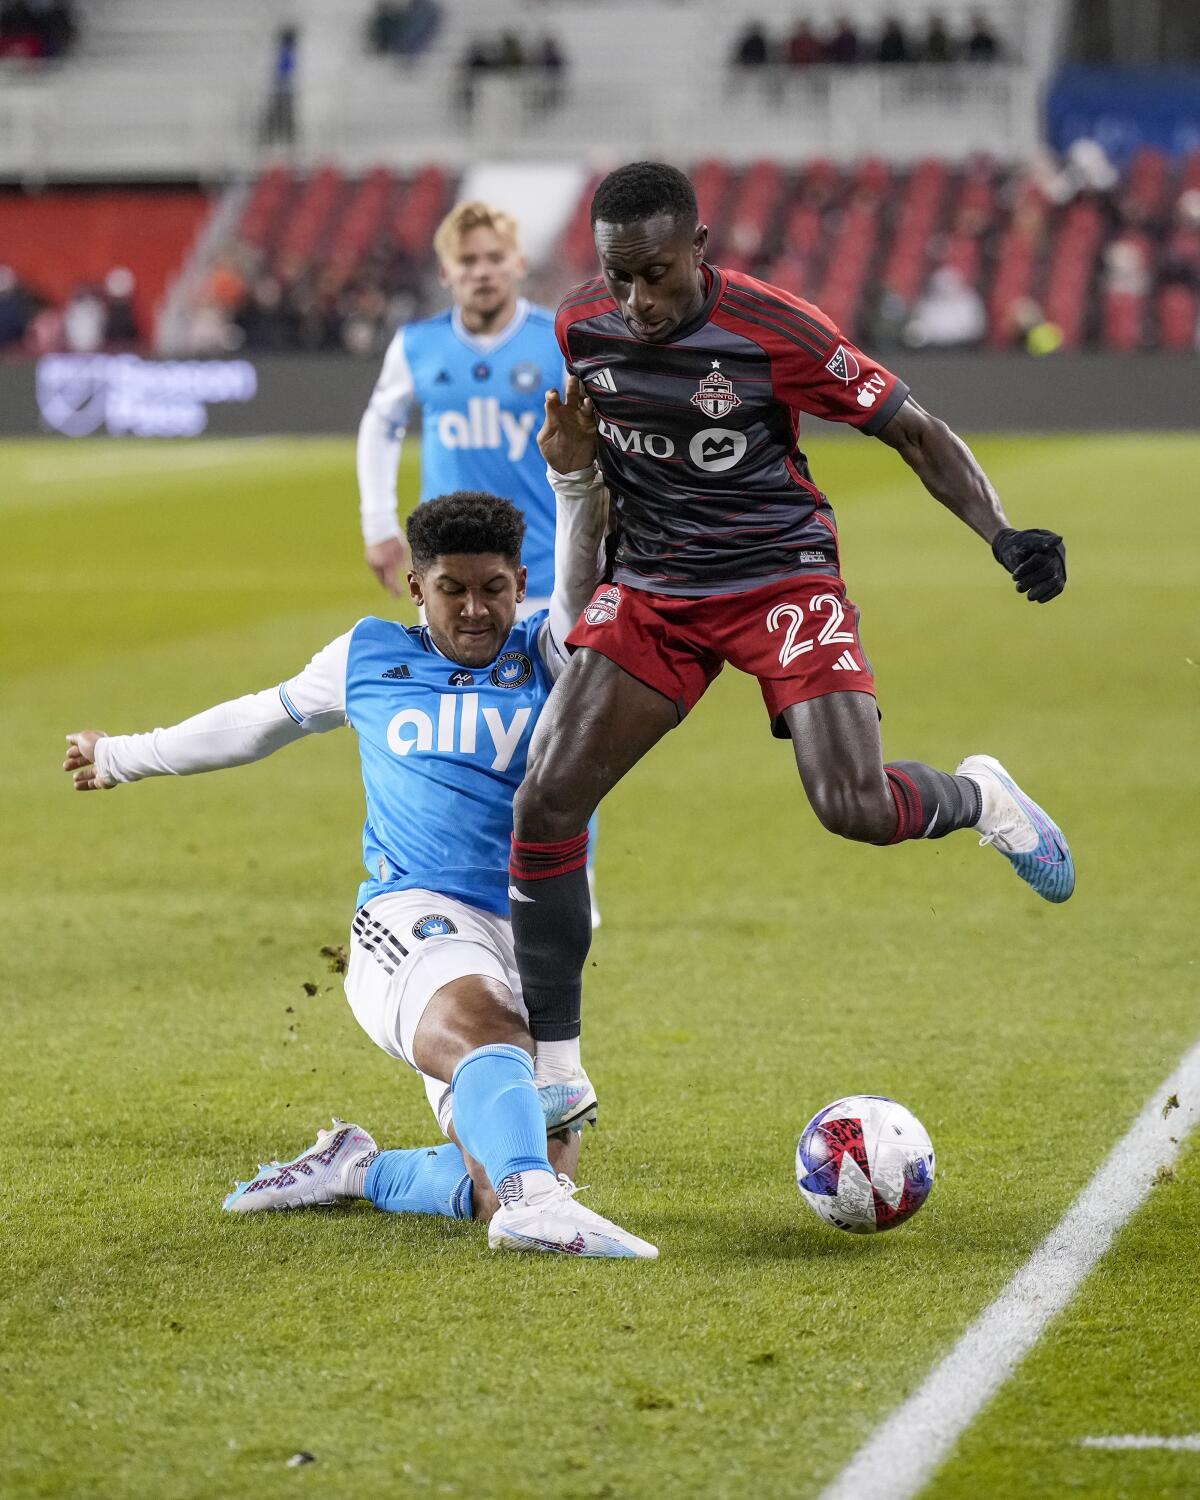 Charlotte FC defender Jaylin Lindsey, front left, clears the ball as Toronto FC midfielder Richie Laryea (22) battles during first-half MLS soccer match action in Toronto, Saturday, April 1, 2023. (Andrew Lahodynskyj/The Canadian Press via AP)